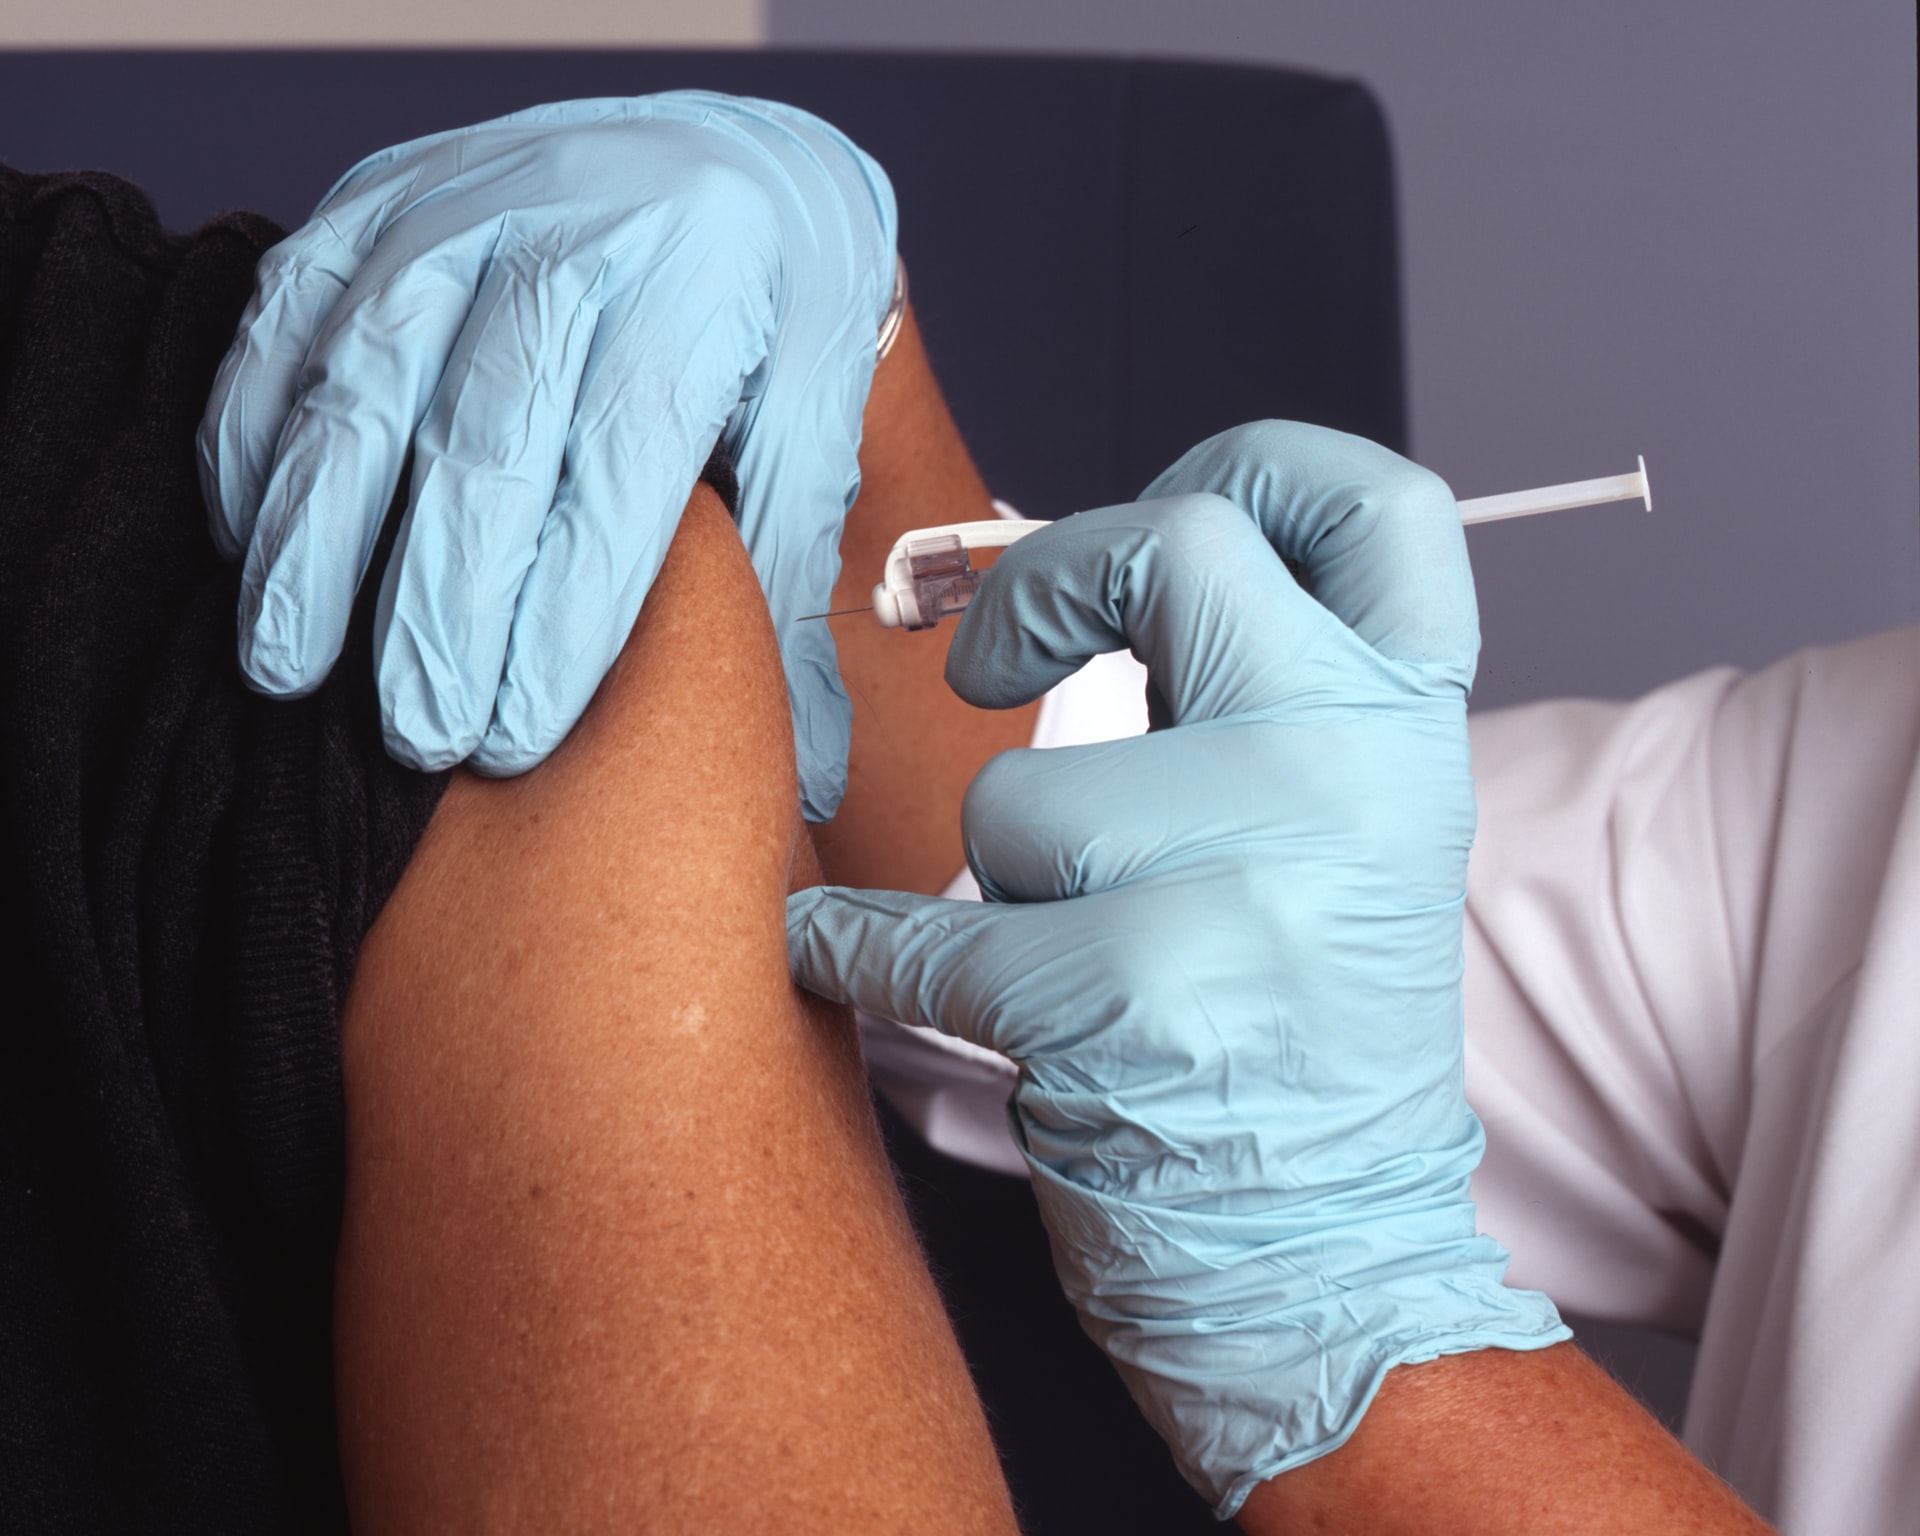 Arm receiving vaccination injection